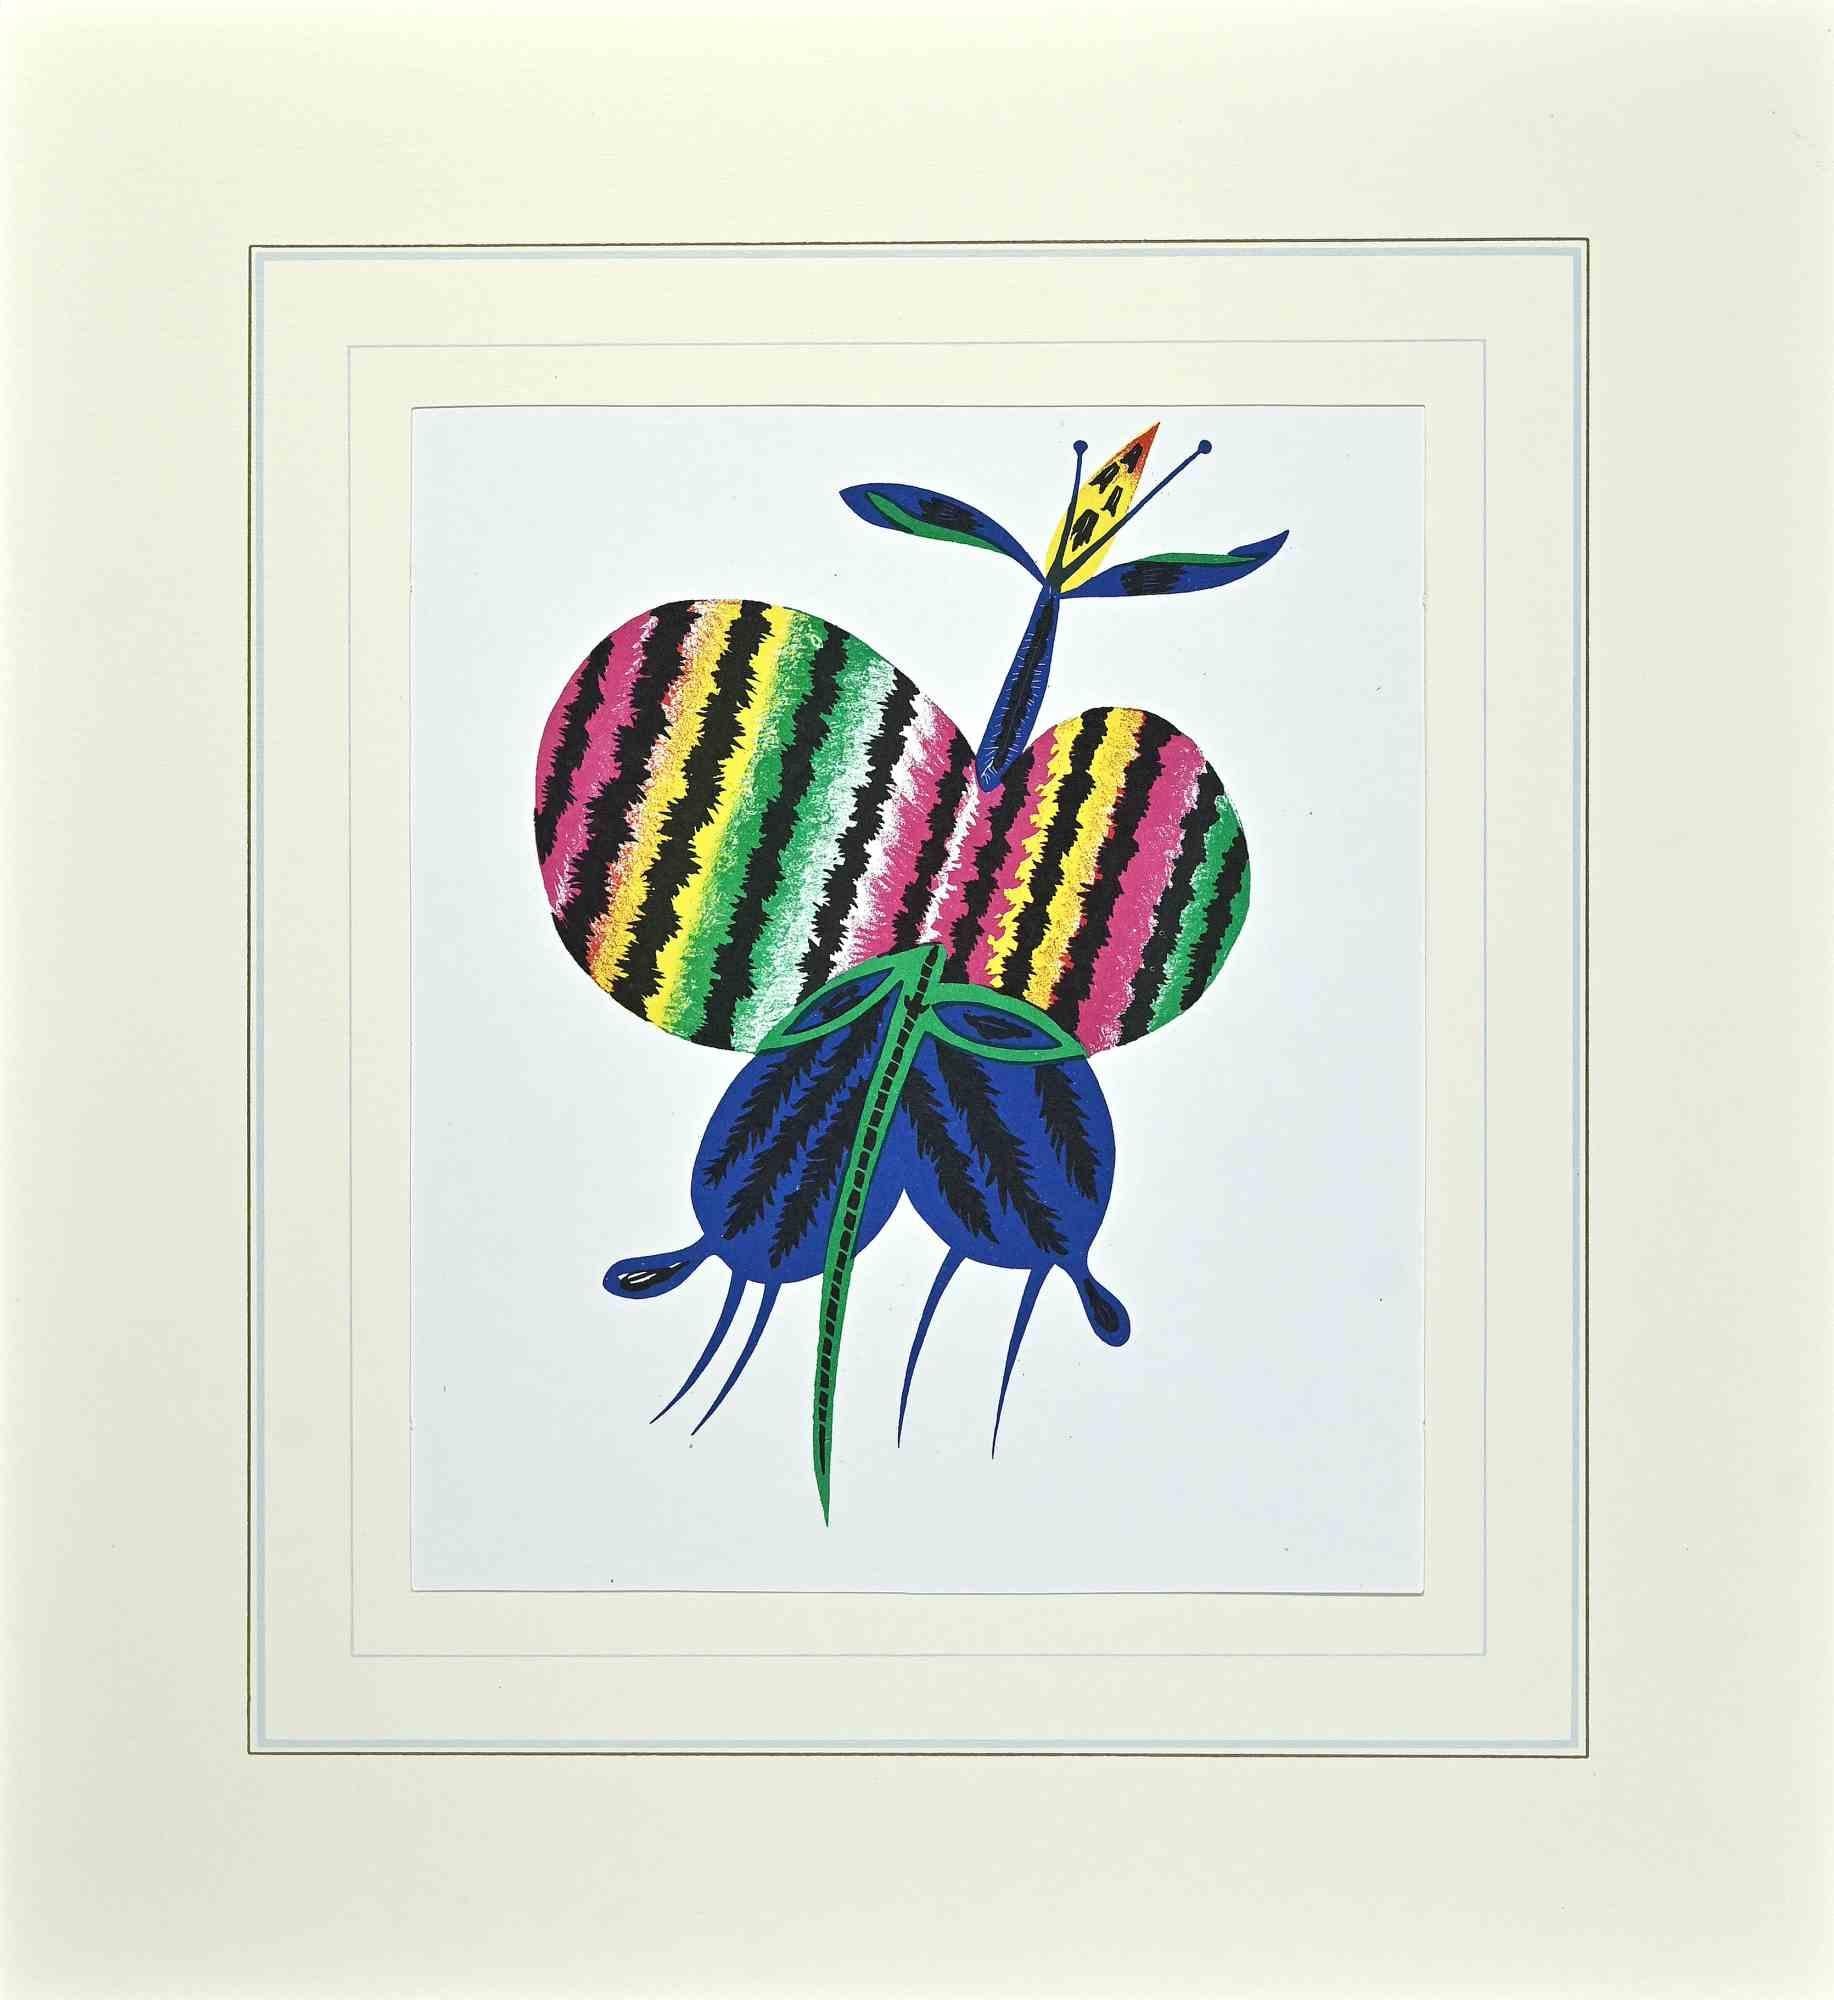 Jean Lurcat Animal Print - Butterfly - Original Lithograph By Jean Lurçat - Mid-20th Century